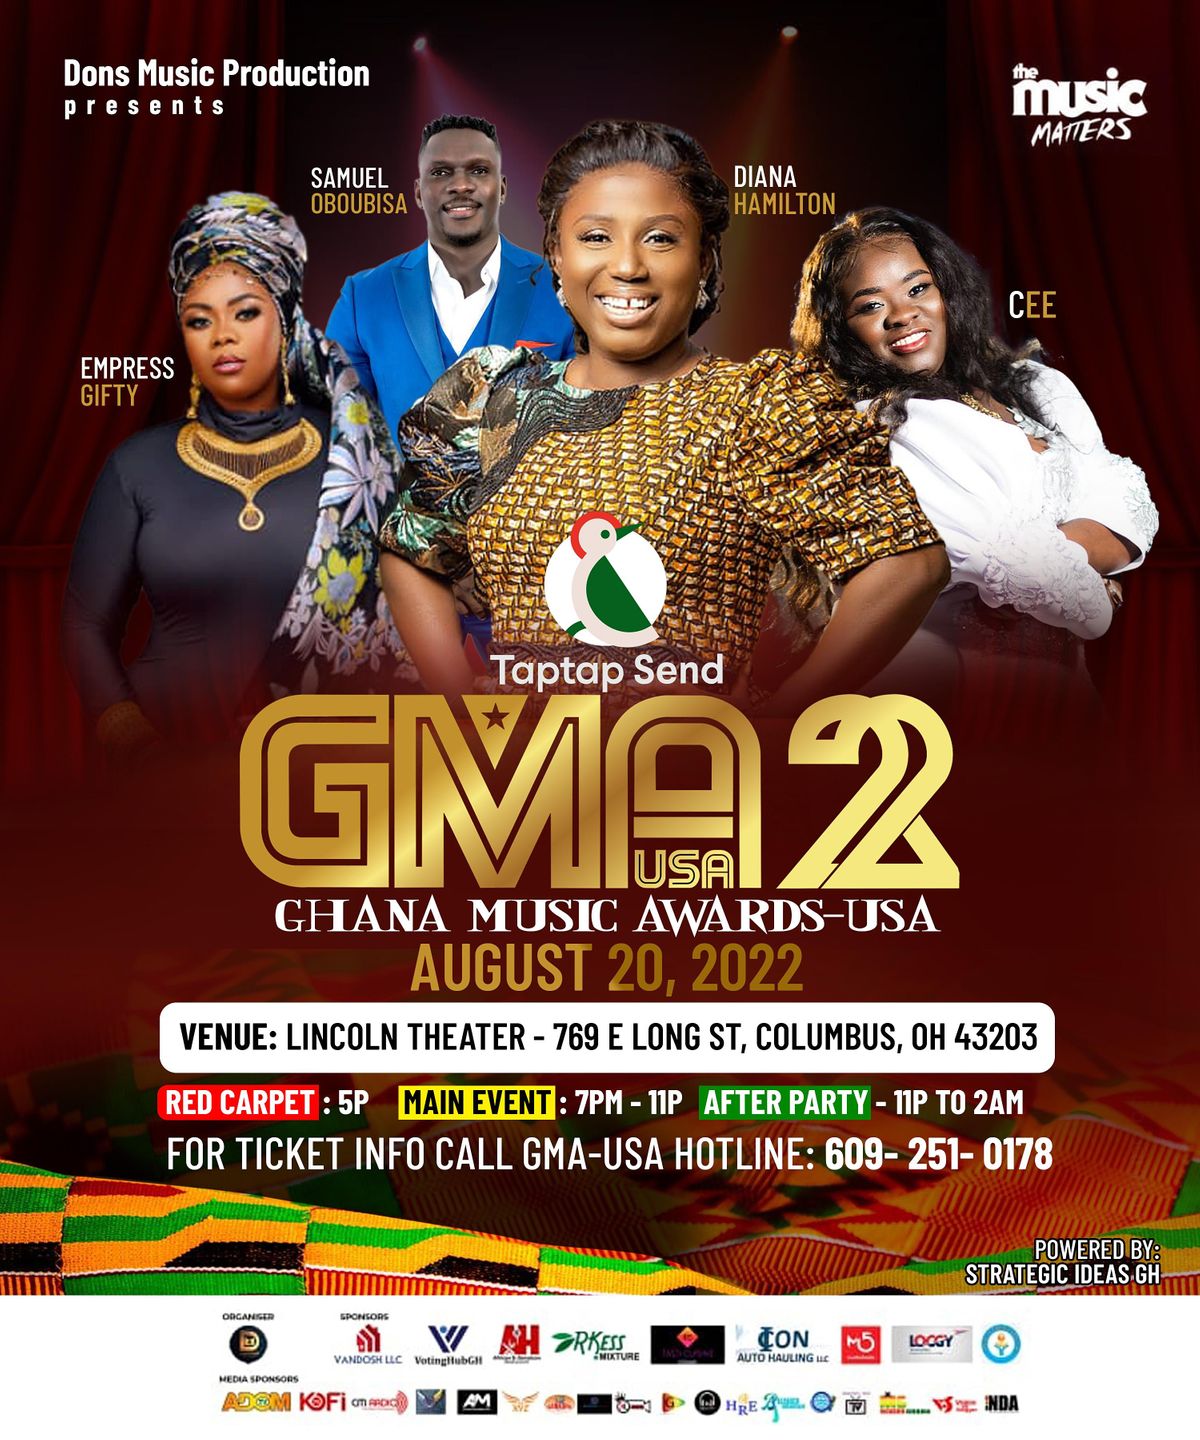 Taptap Send Ghana Music Awards USA 2022 Lincoln Theatre, Columbus, OH